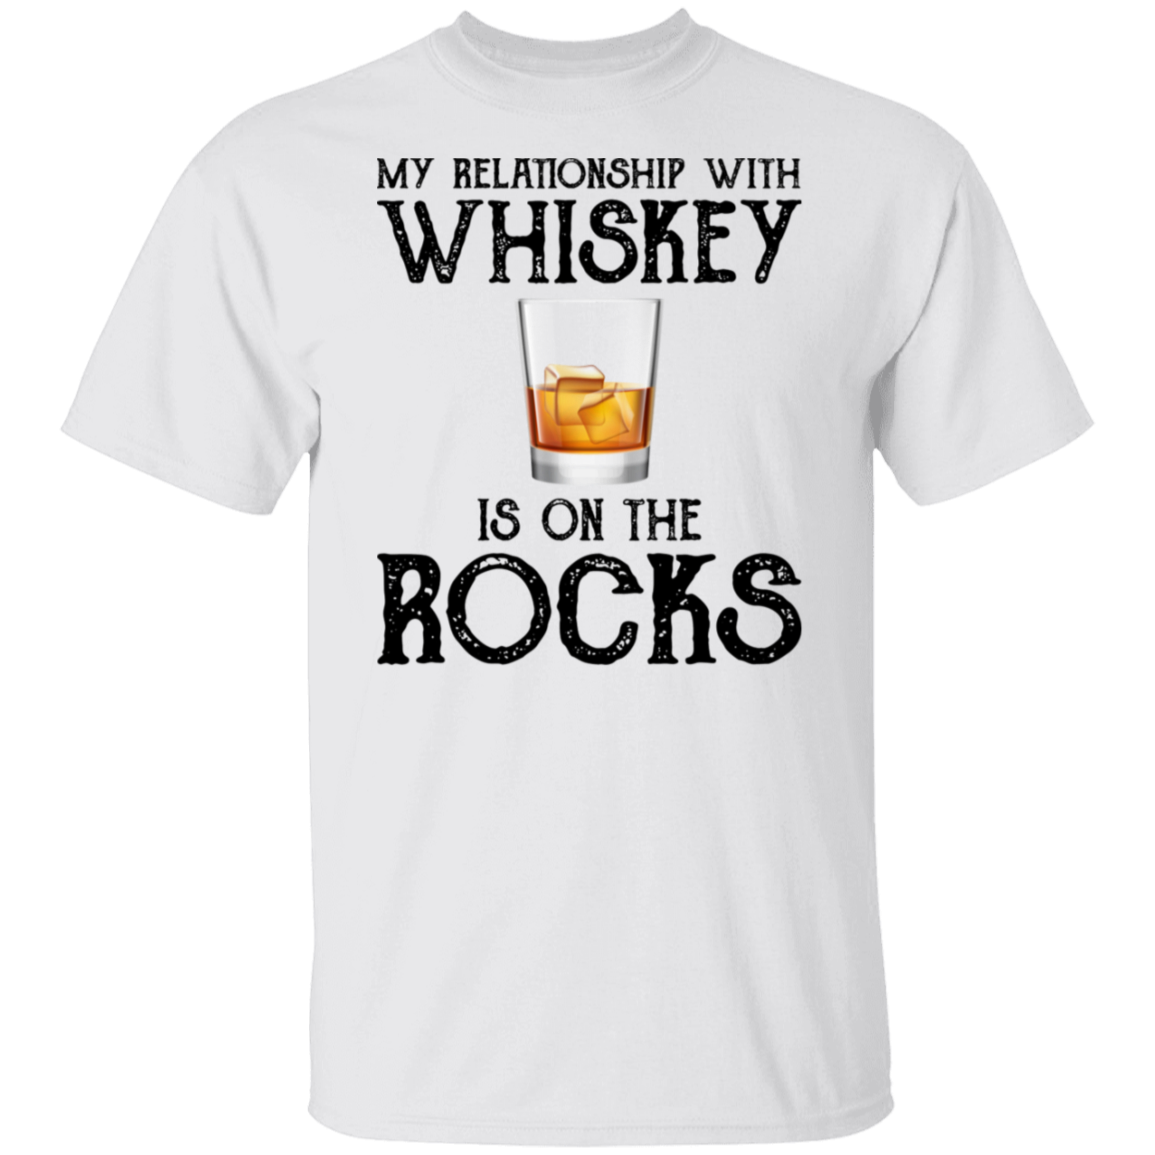 My Relationship With Whiskey T-Shirt